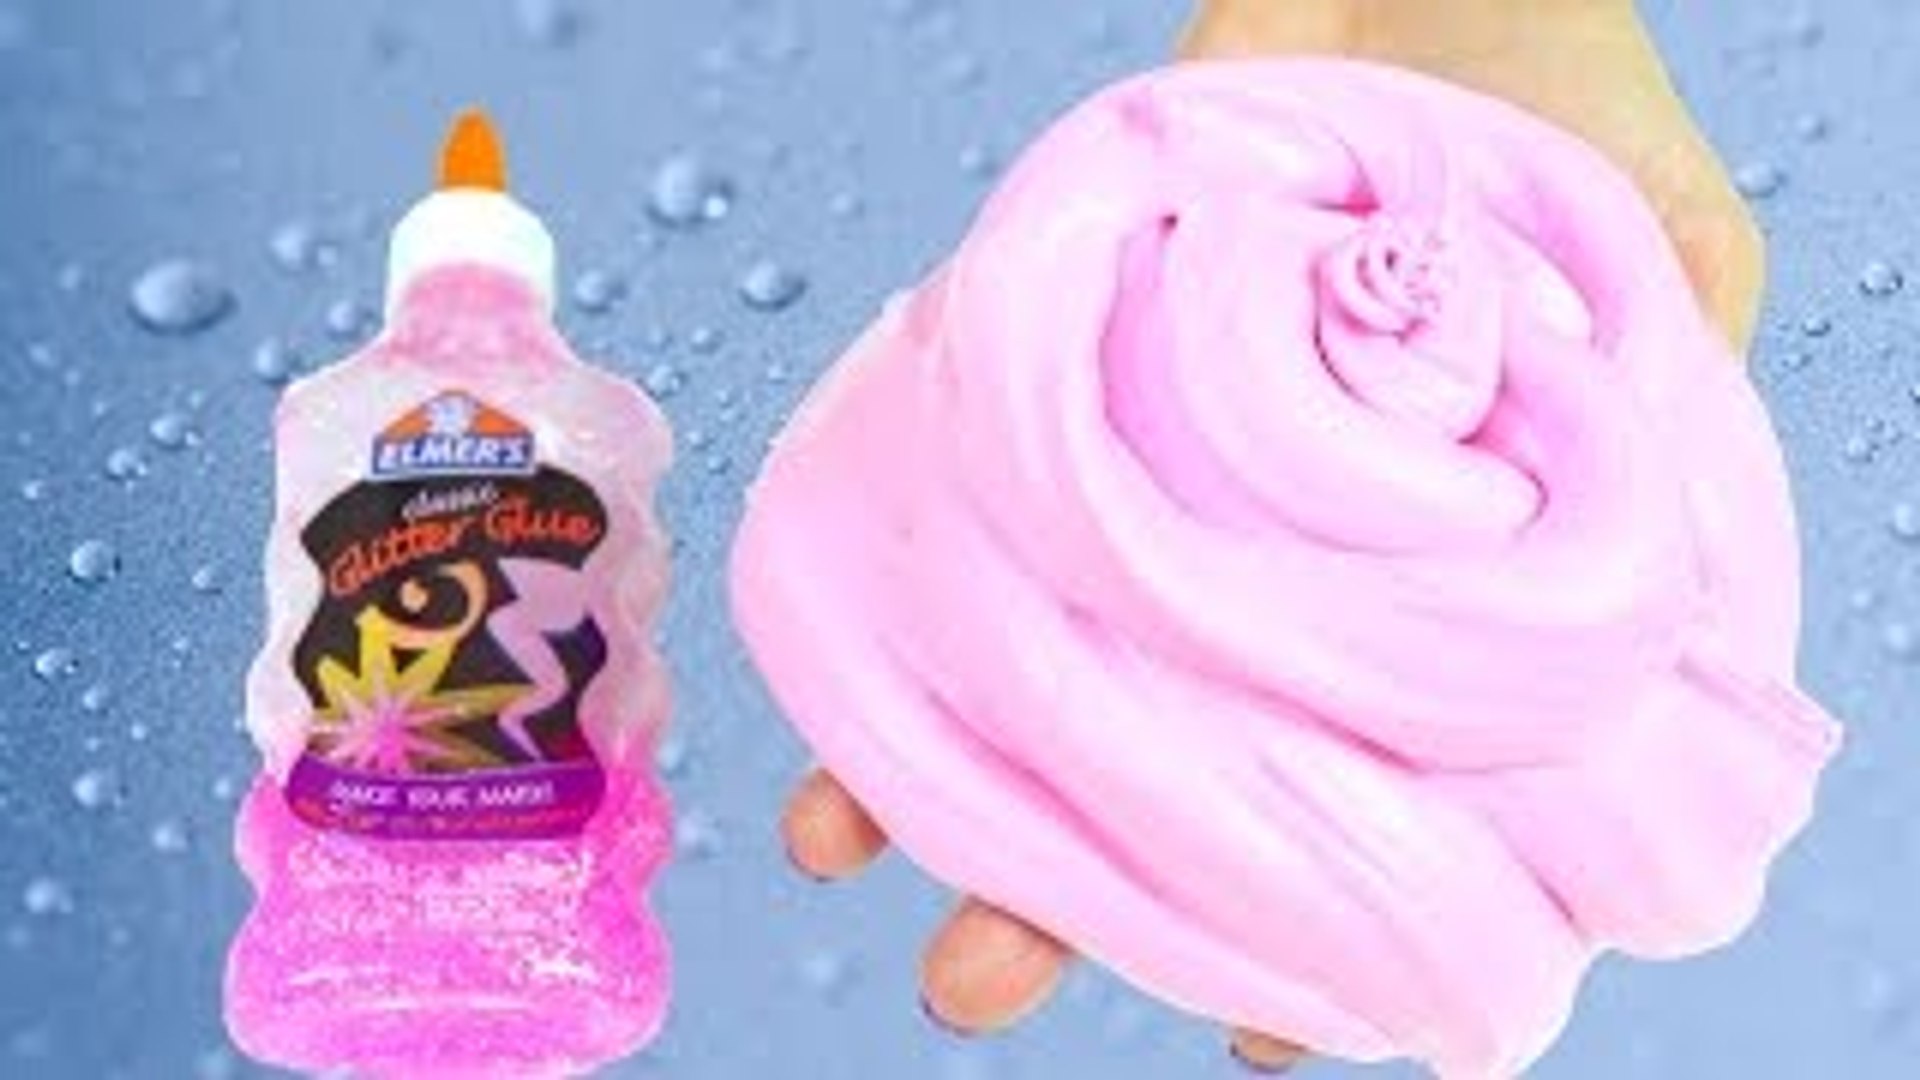 Elmers Glue Fluffy Slime Without Borax How To Make Fluffy Slime With Elmers Glue No Bo